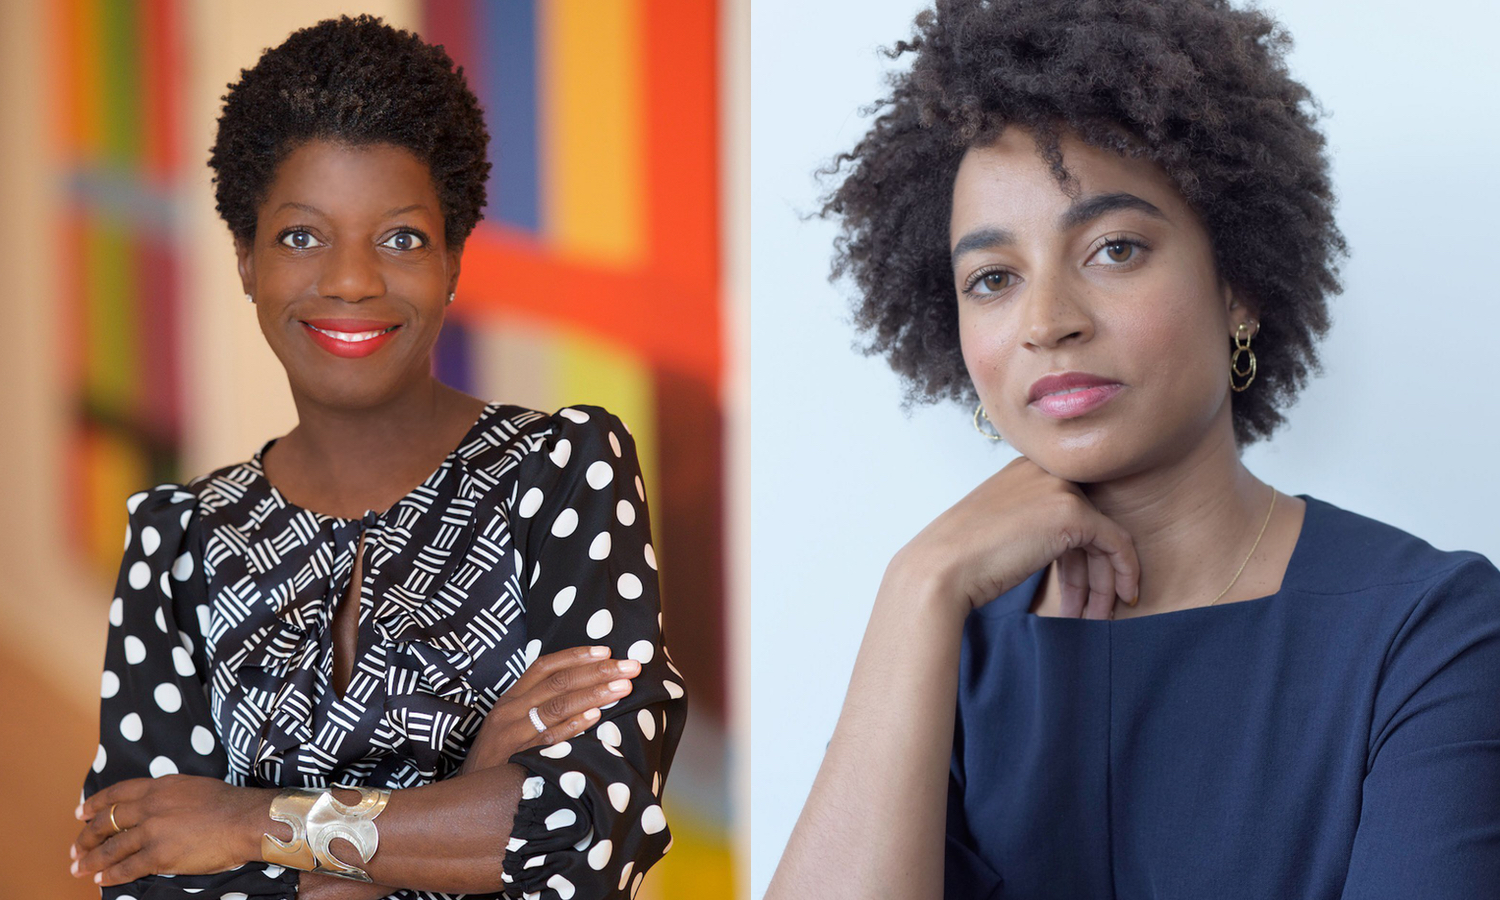 Black Icons of Art: Thelma Golden and Rujeko Hockley